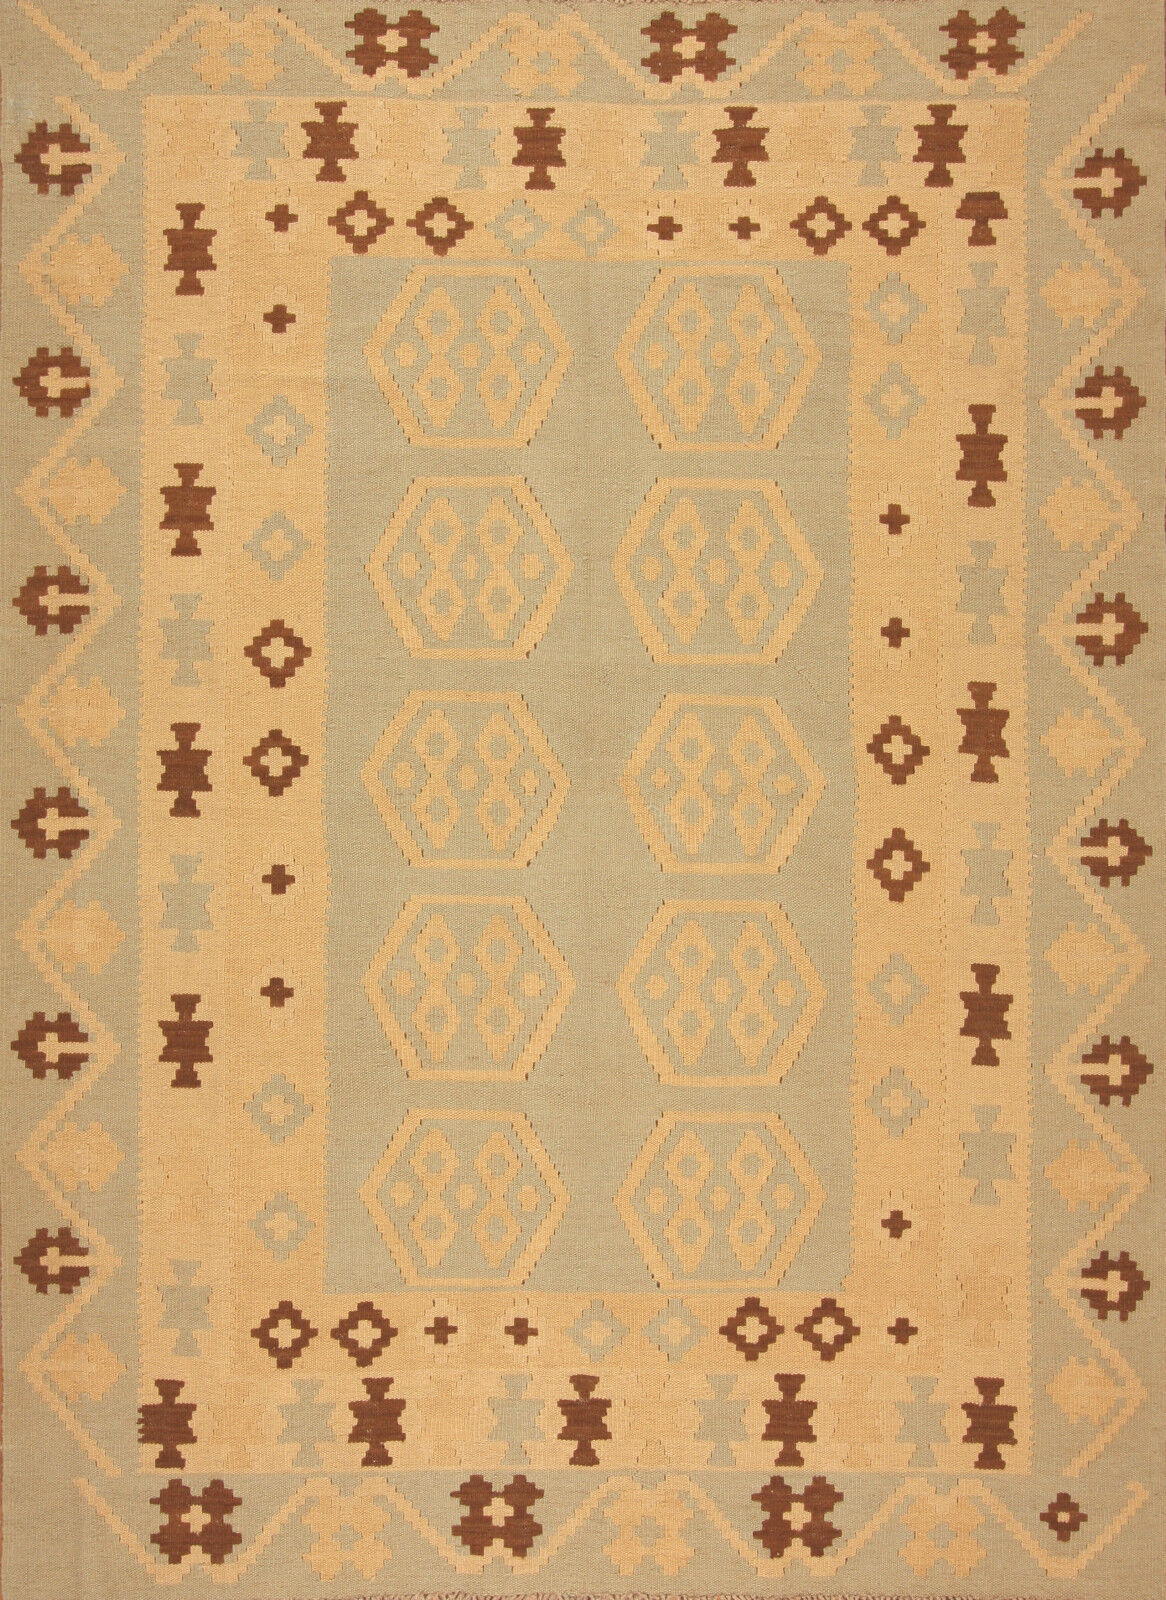 Detailed close-up of the timeless beauty depicted in the Handmade Vintage Afghan Flatweave Kilim